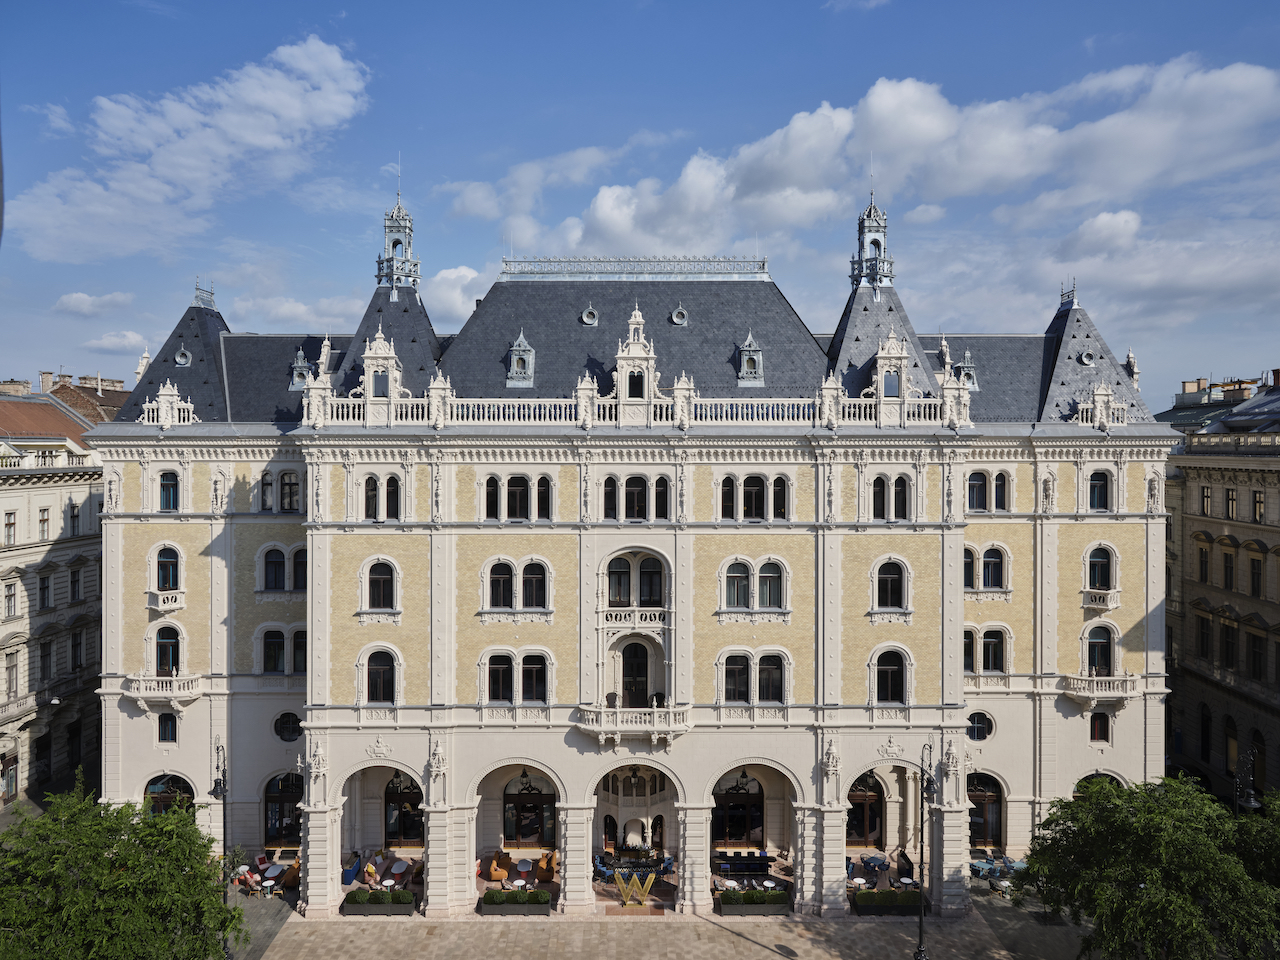 W Budapest Injects Life into City’s Iconic Palace